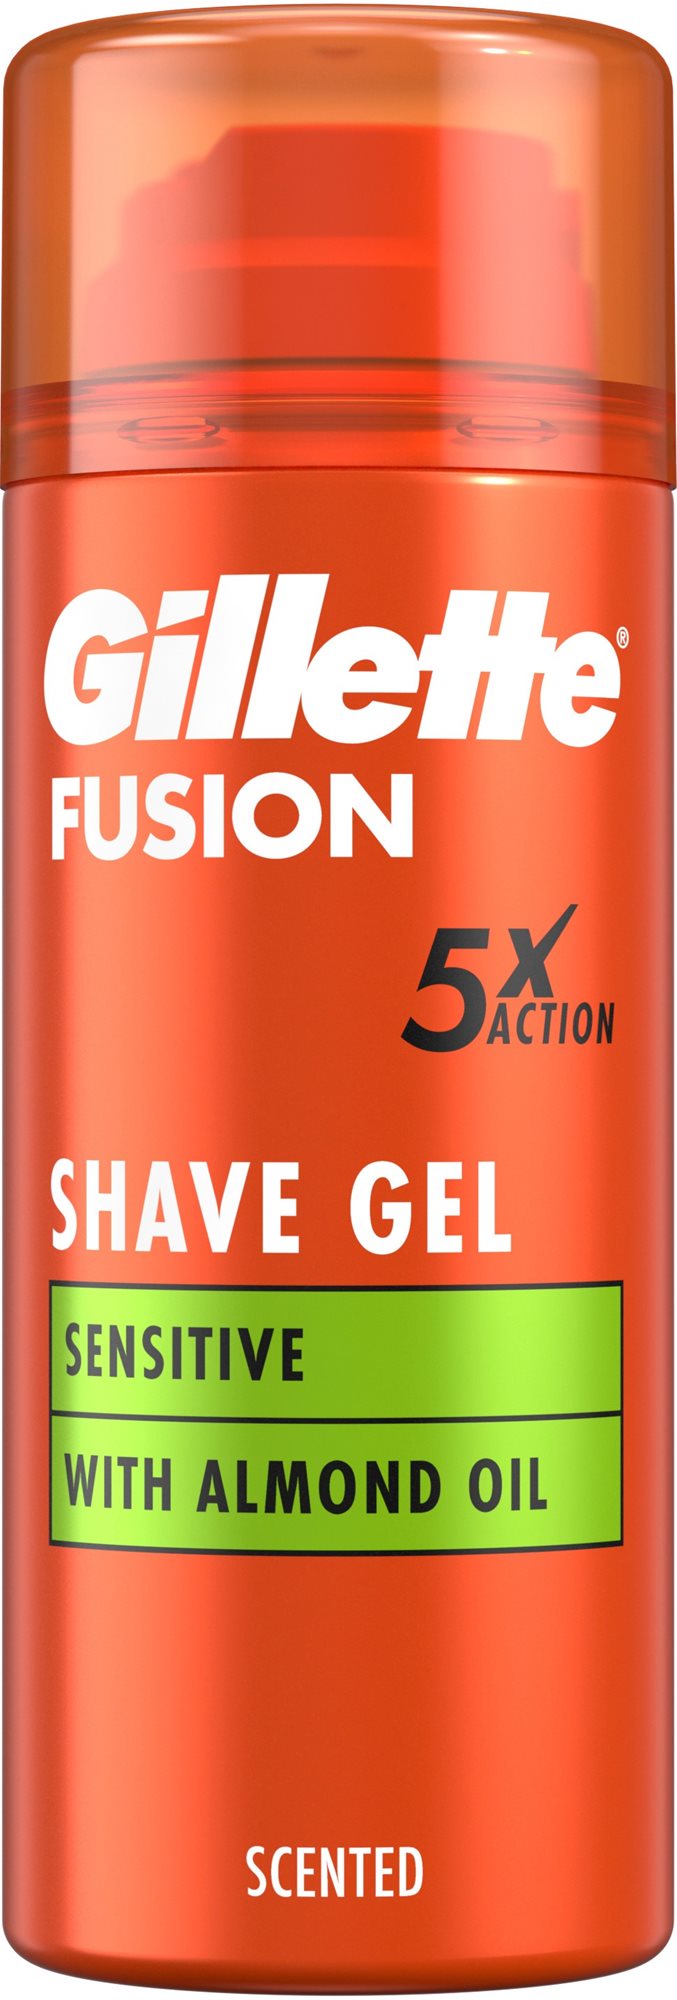 GILLETTE Fusion Shave Gel Sensitive with Almond oil 75 ml